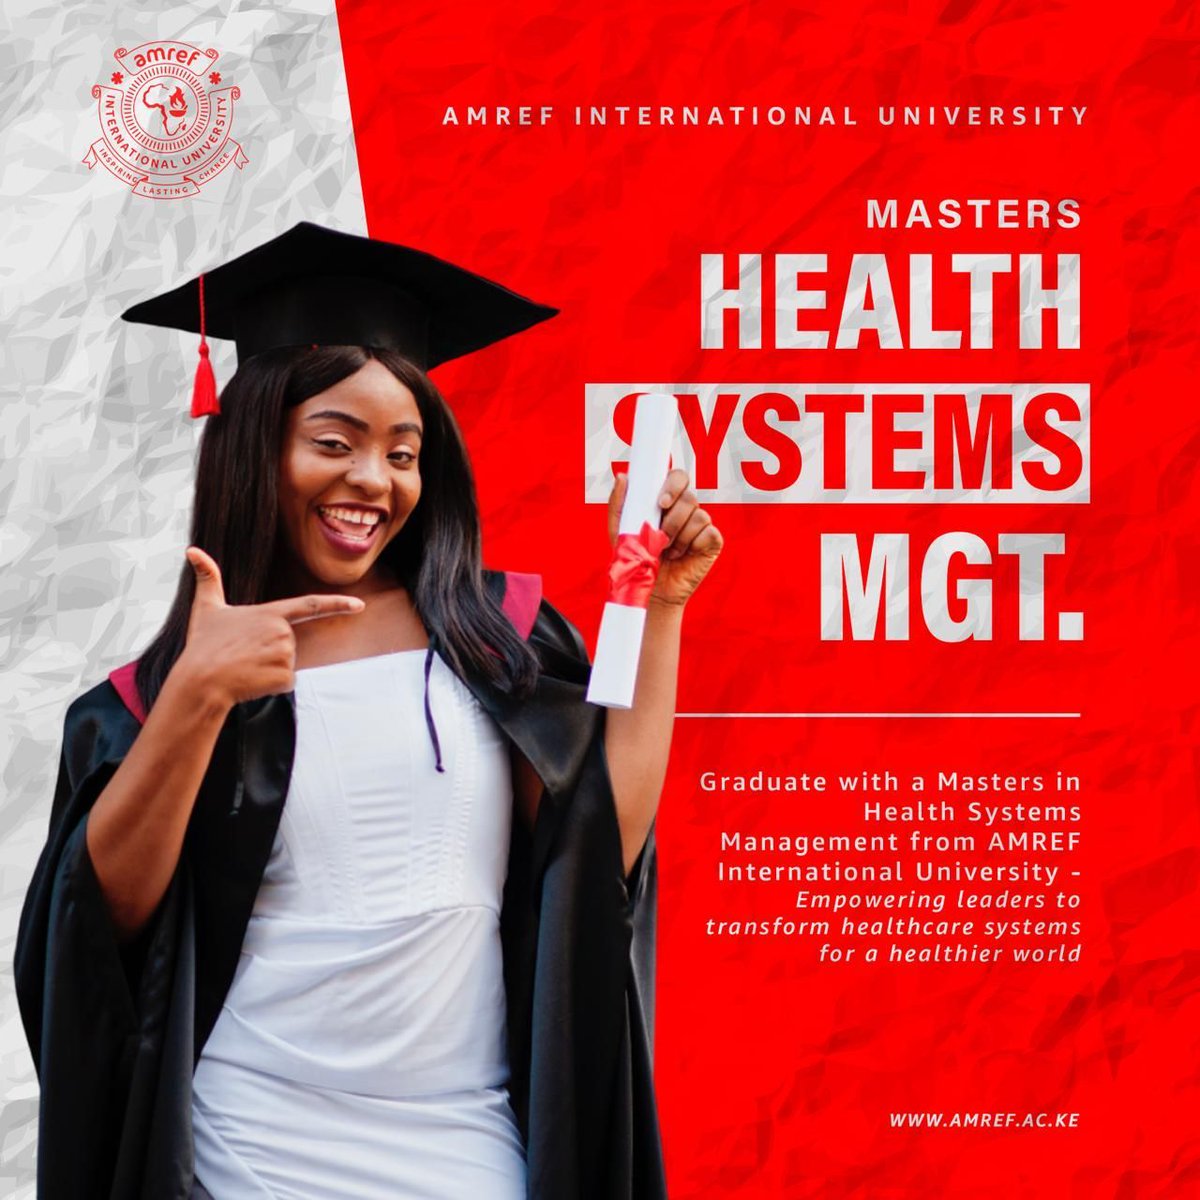 Graduate with a Masters in Health Systems Management from @AmrefUniversity - Empowering leaders to transform healthcare systems for a healthier world.
#InspiringLastingChange